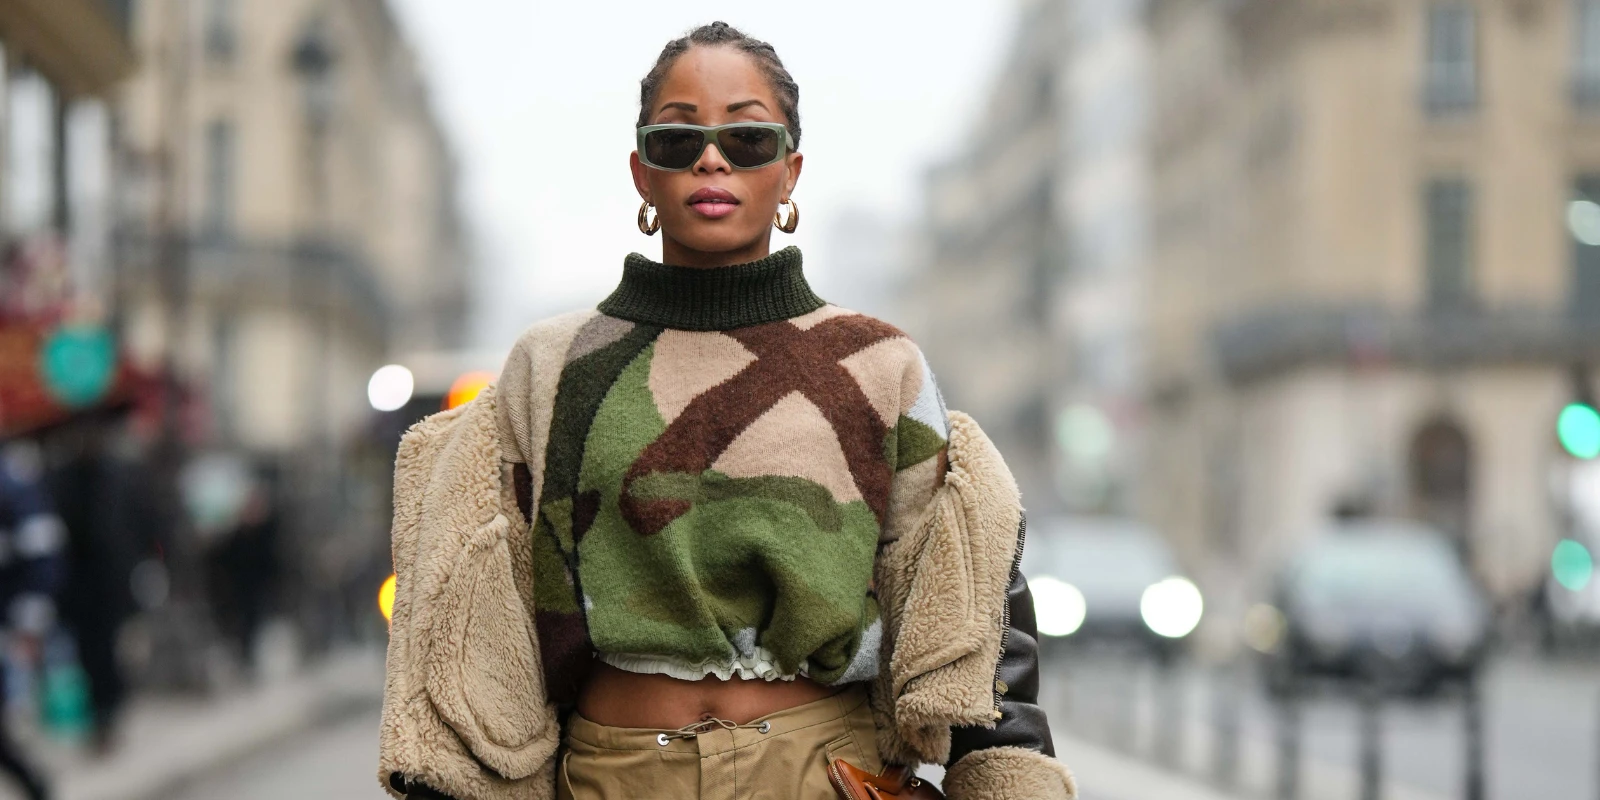 The 20 Most Influential Personal Style Bloggers Right Now - Fashionista